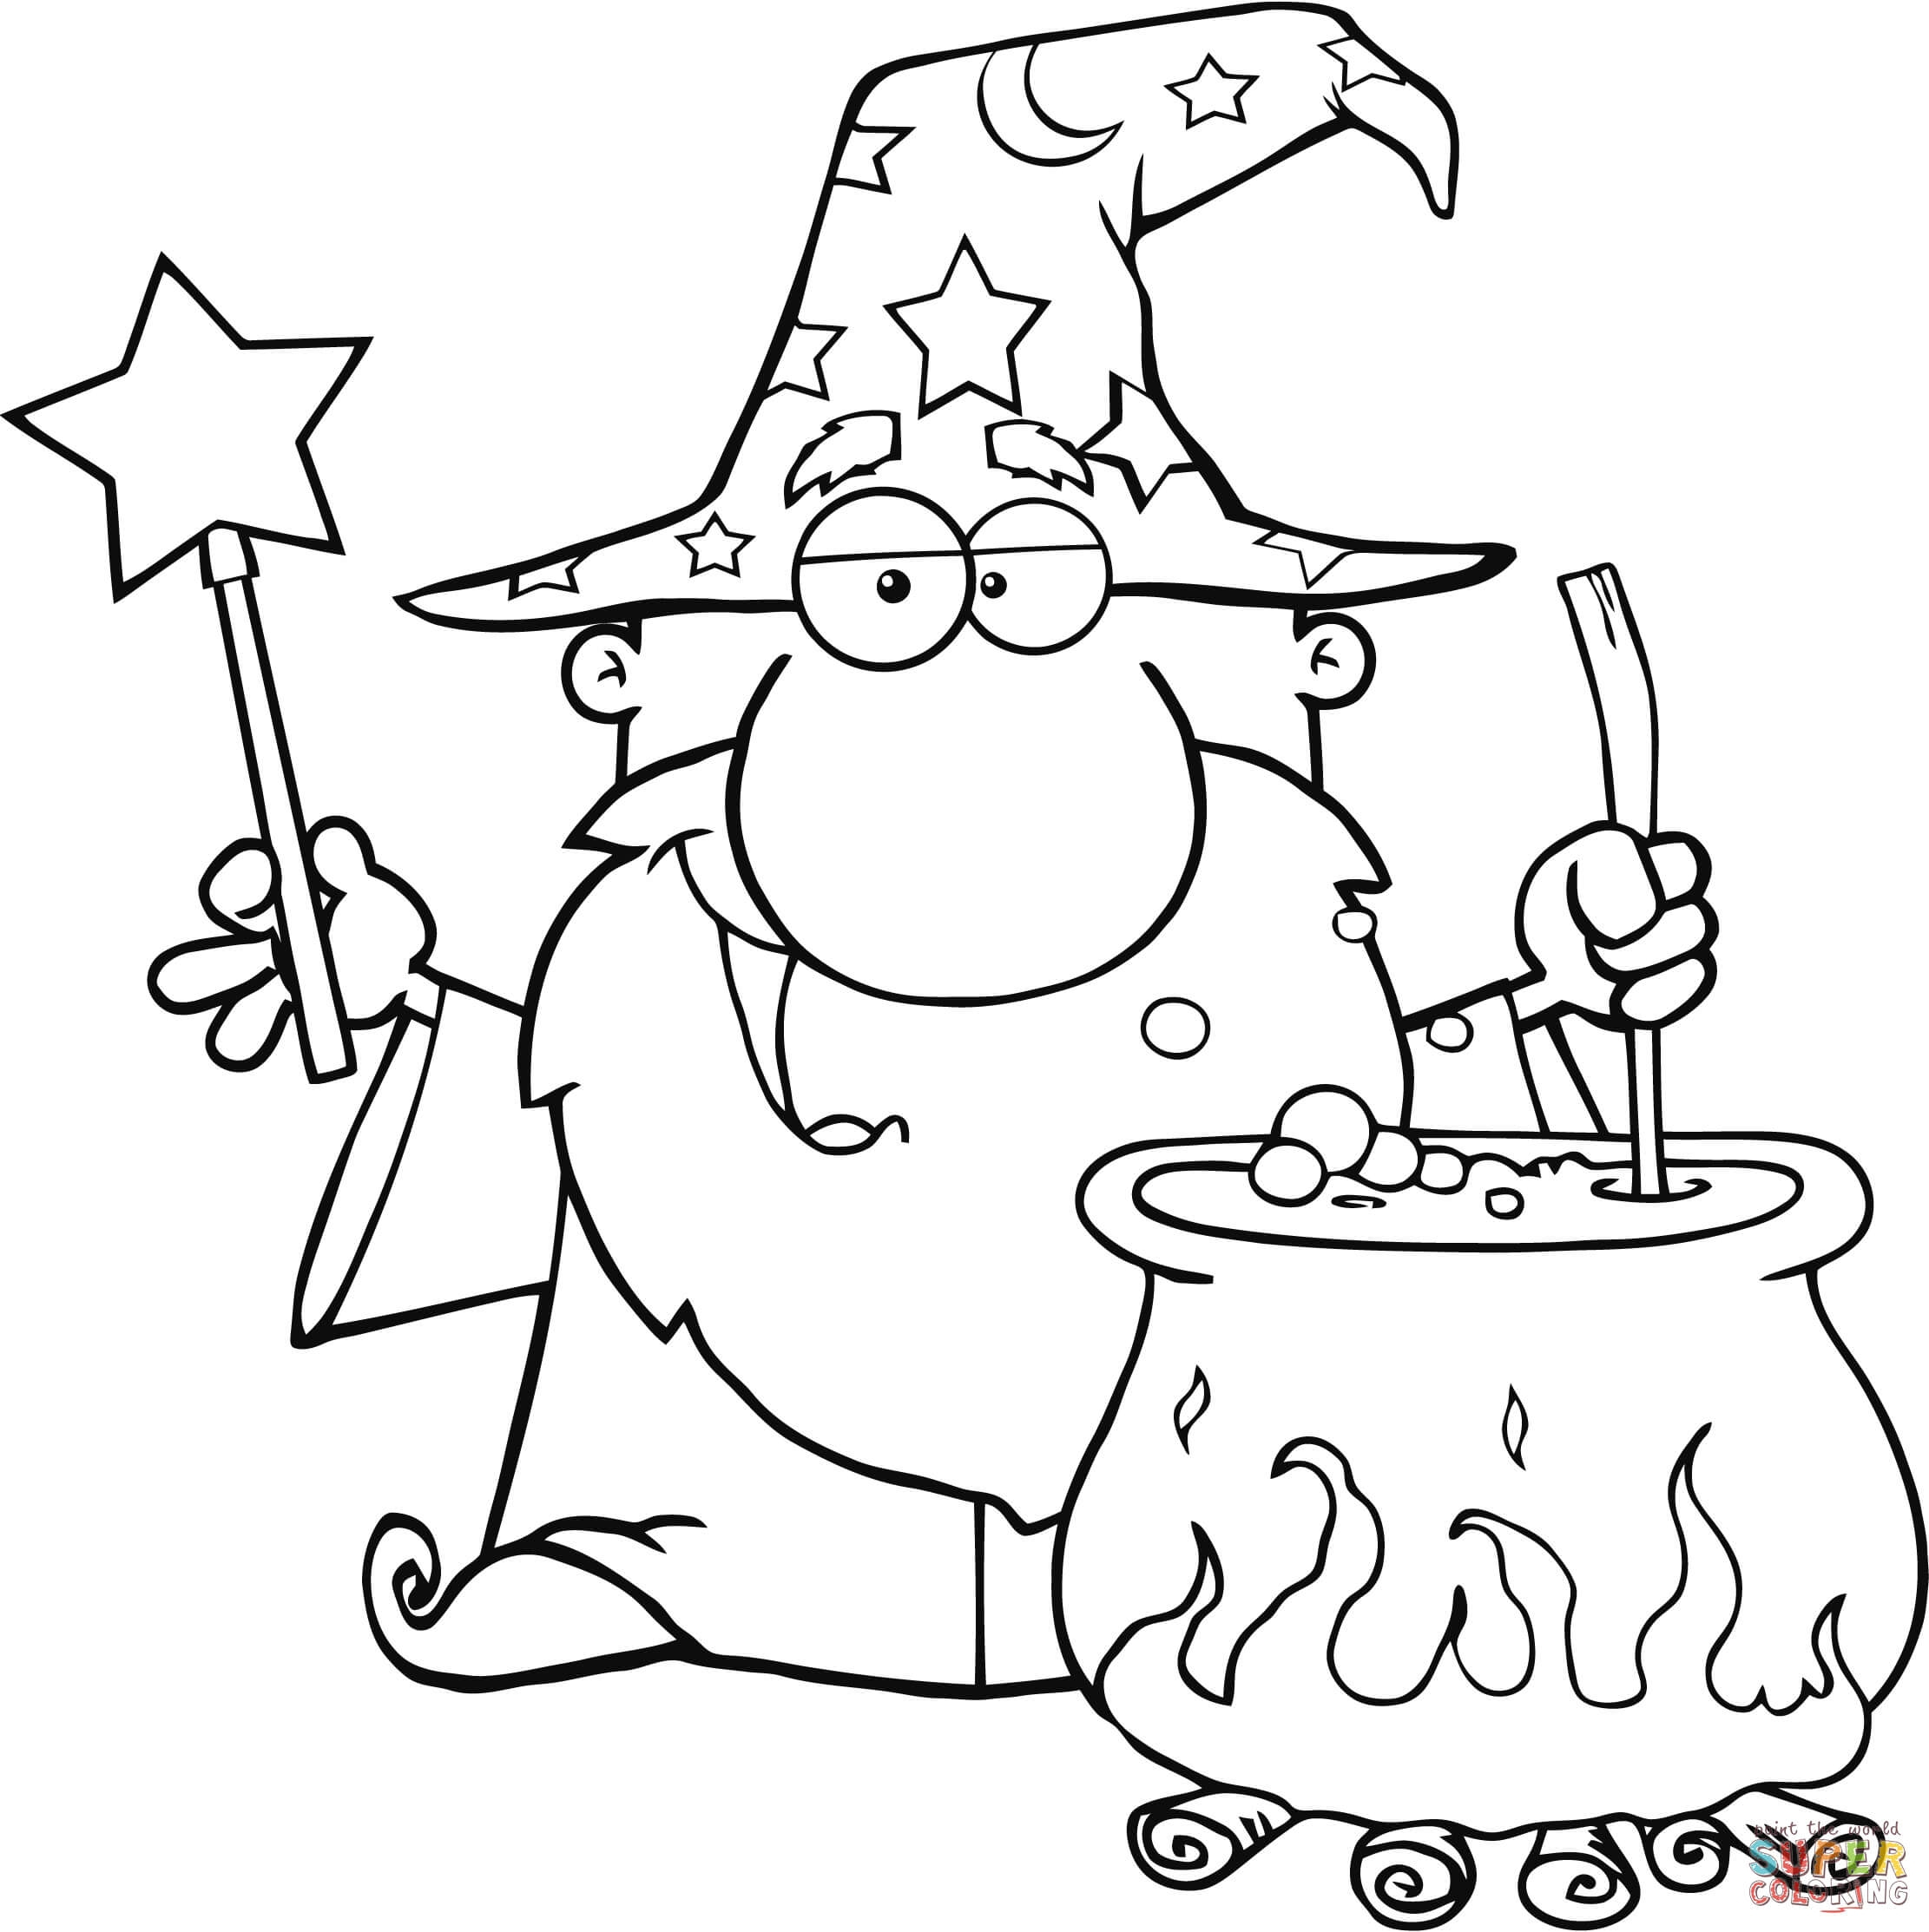 Wizard Of Oz Printable Coloring Pages Cool Free Wizard Coloring Pages Funny Coloring Free Coloring Book